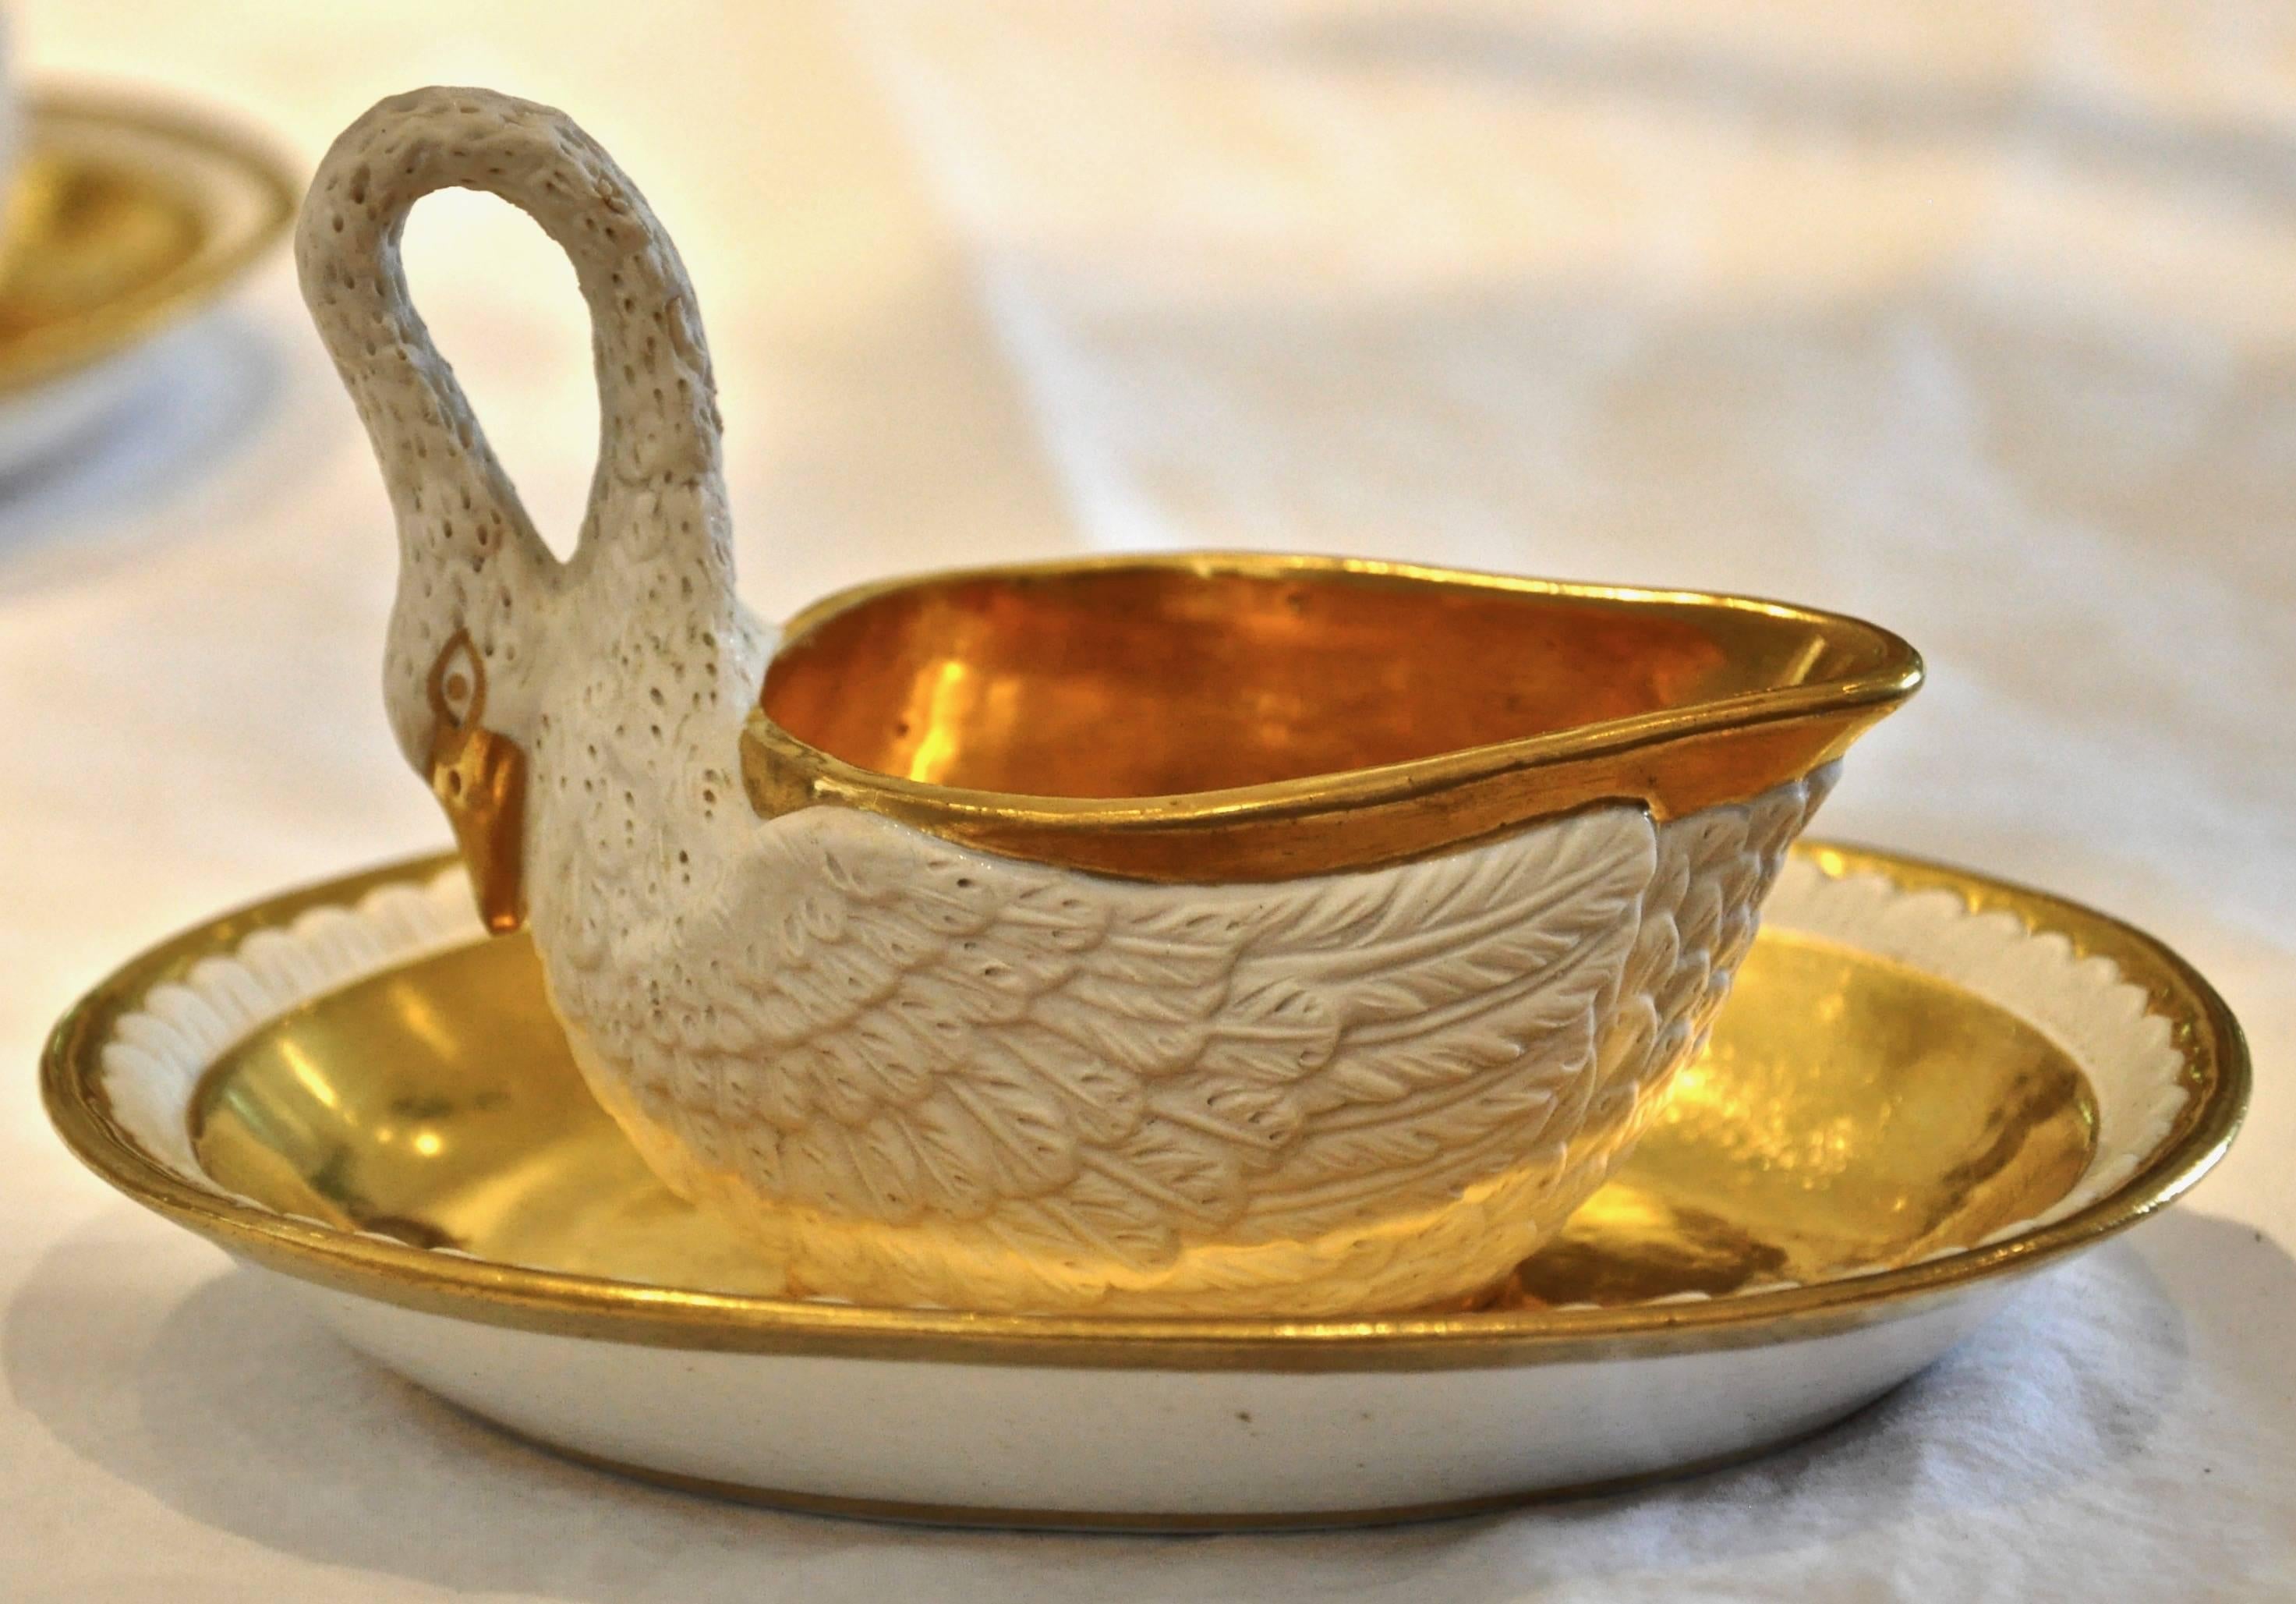 Set of twelve period empire early 19th century bisque and gilt swan cups

- Each modeled as a naturalistic swan in bisque porcelain and fire gilt

- A set of 11 original empire swan cups and saucers and one additional later, variant swan cup and